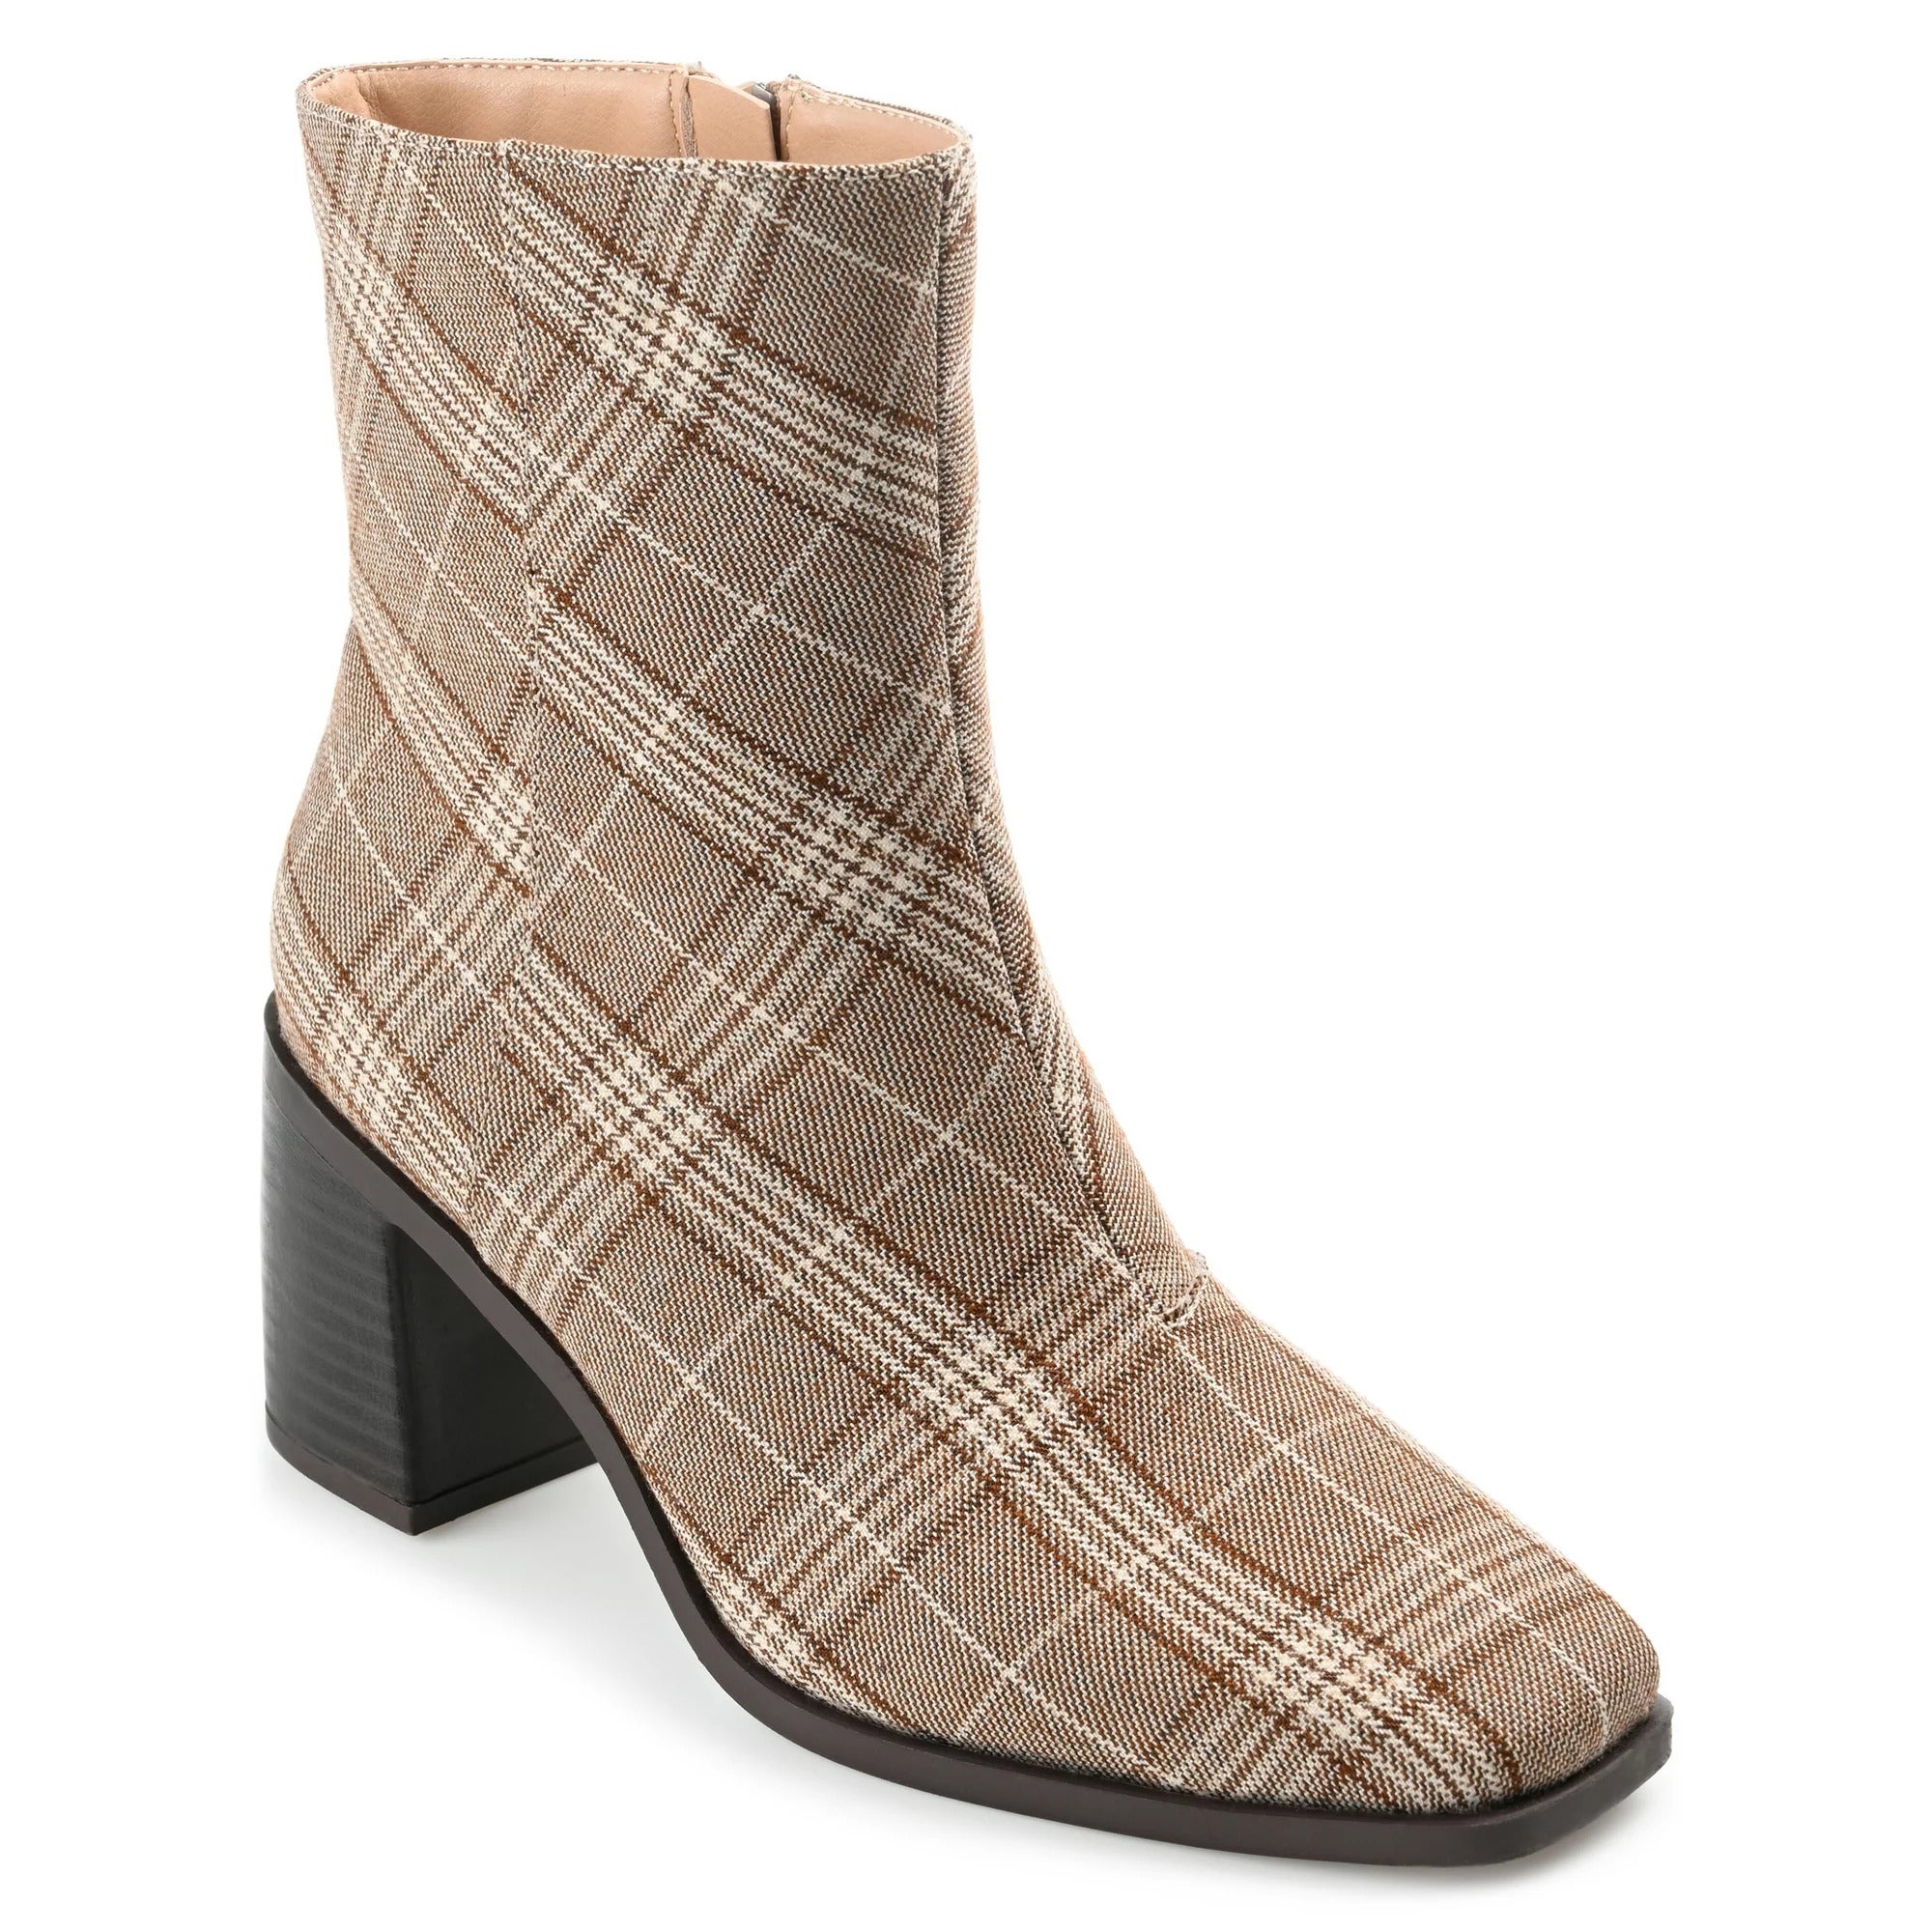 The stacked heel boot in a brown plaid fabric upper